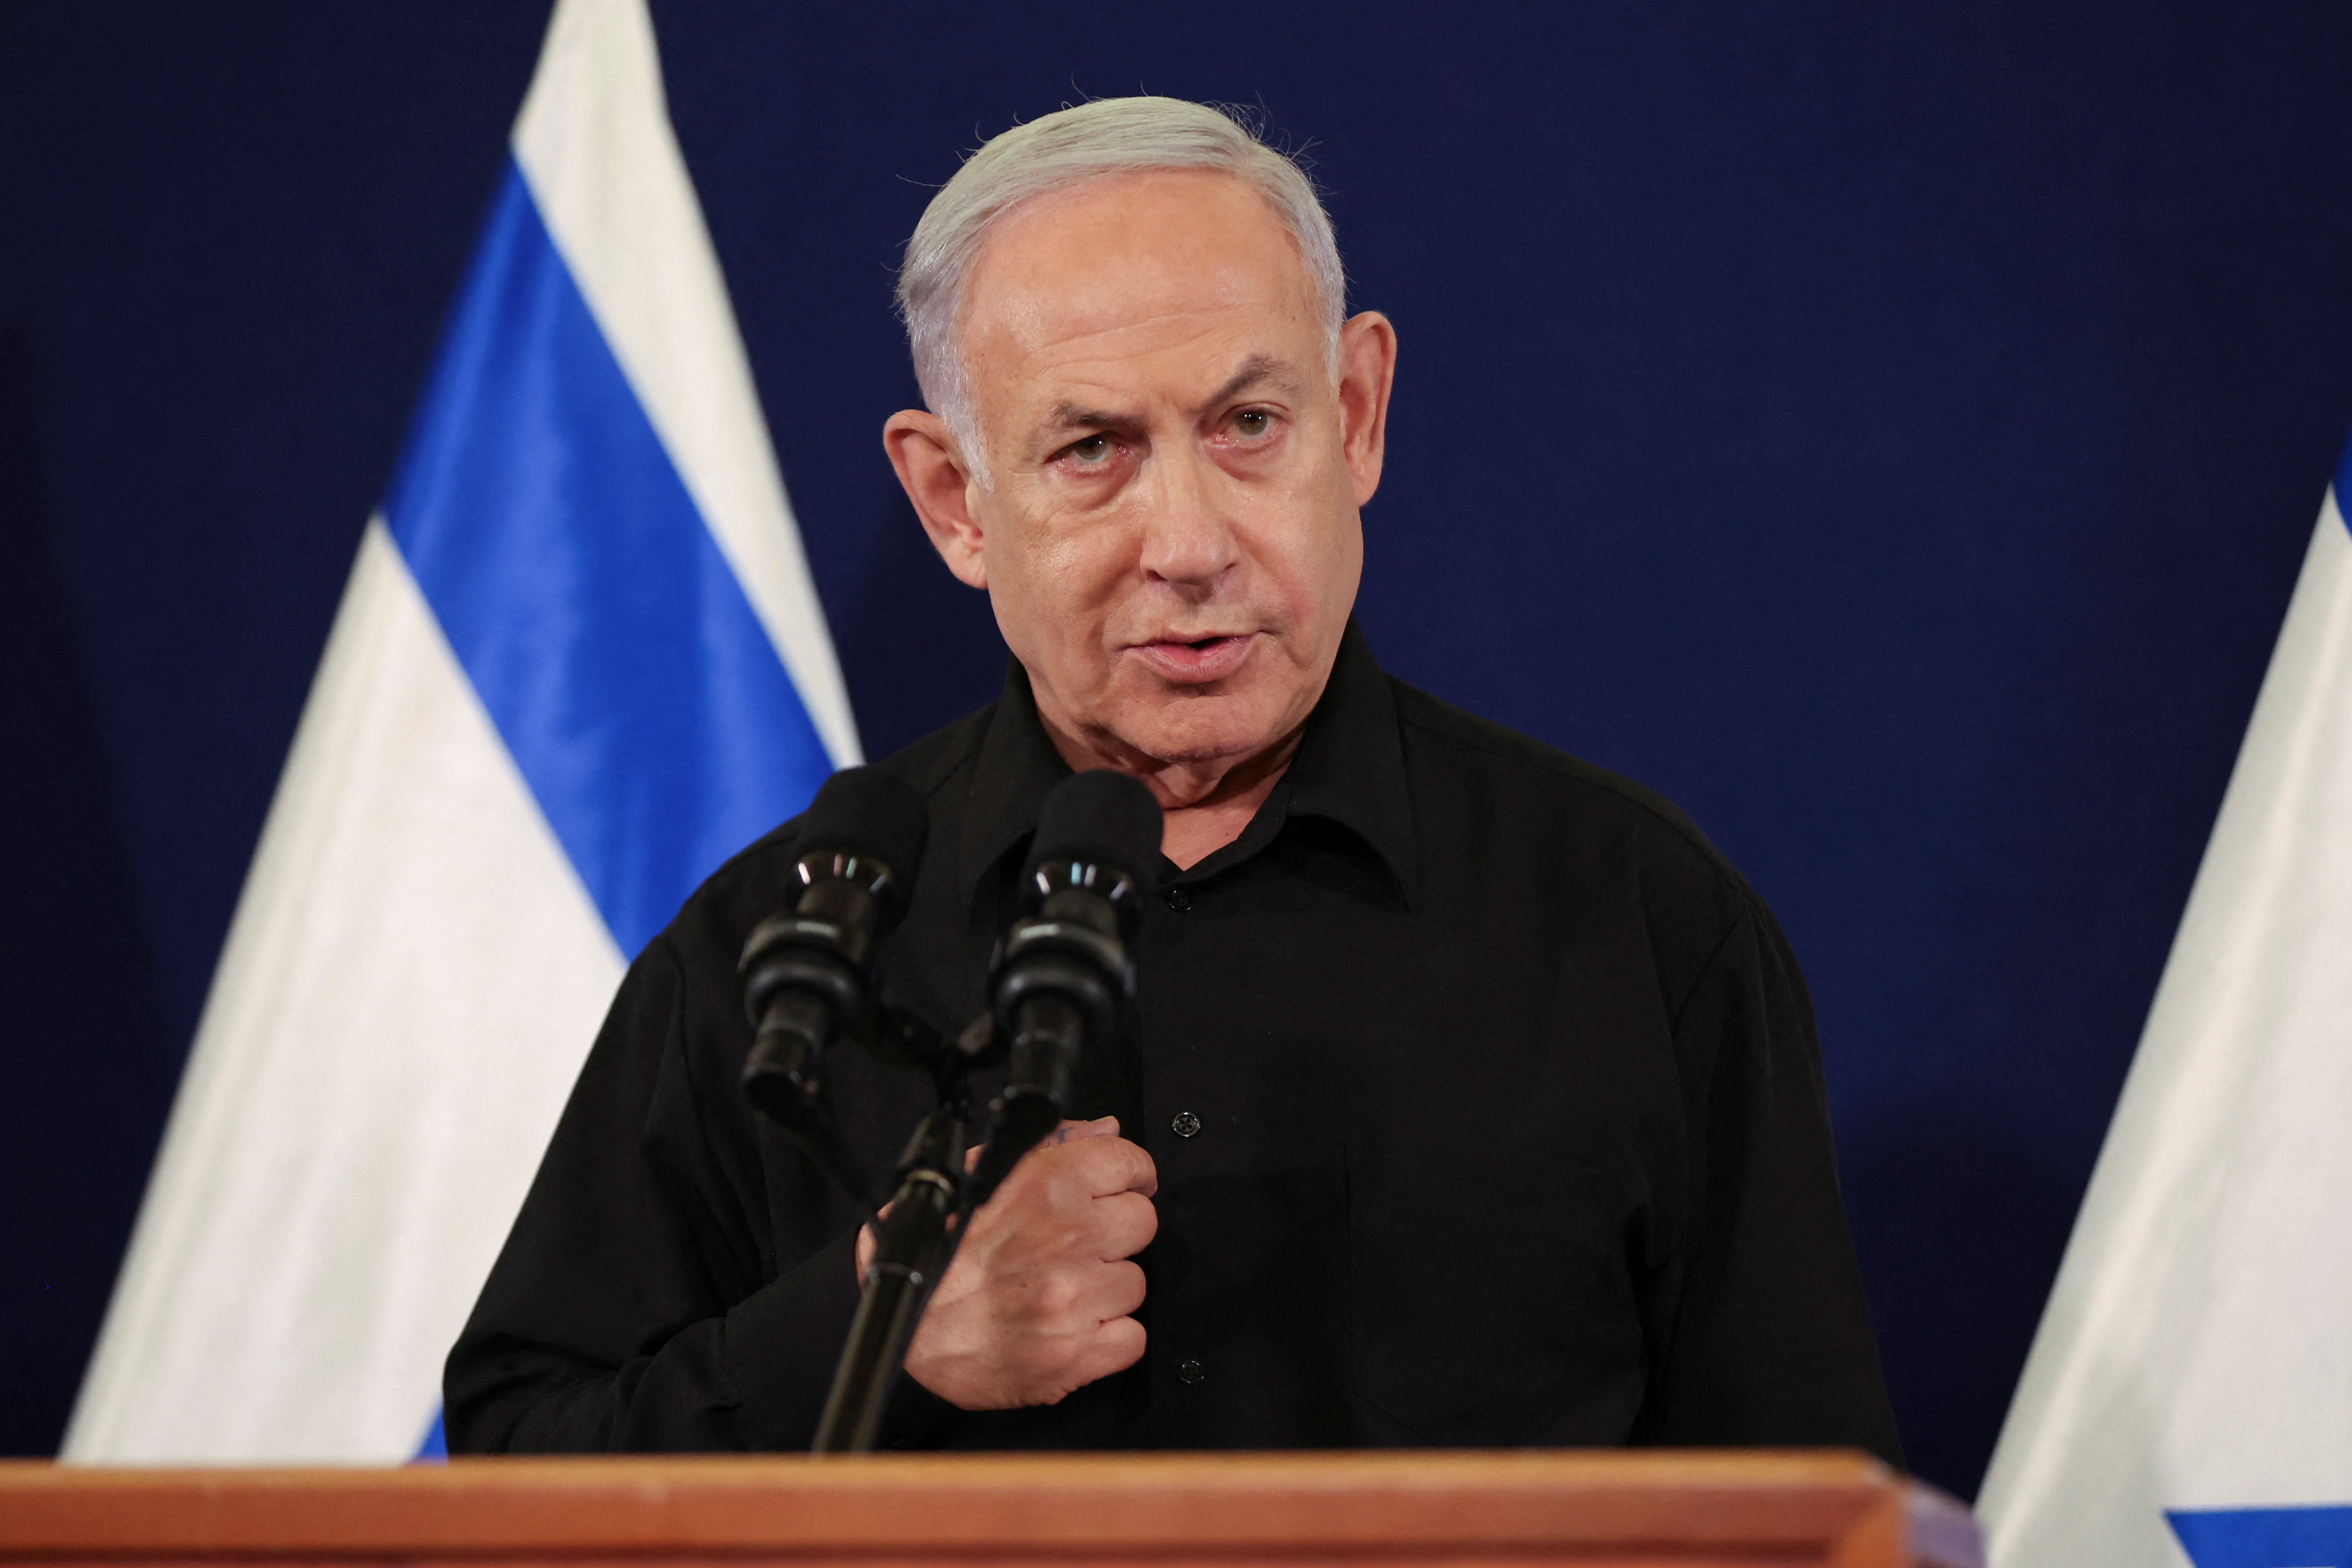 Israeli prime minister Benjamin Netanyahu has repeated that there will be no temporary ceasefire until hostages are released by Hamas